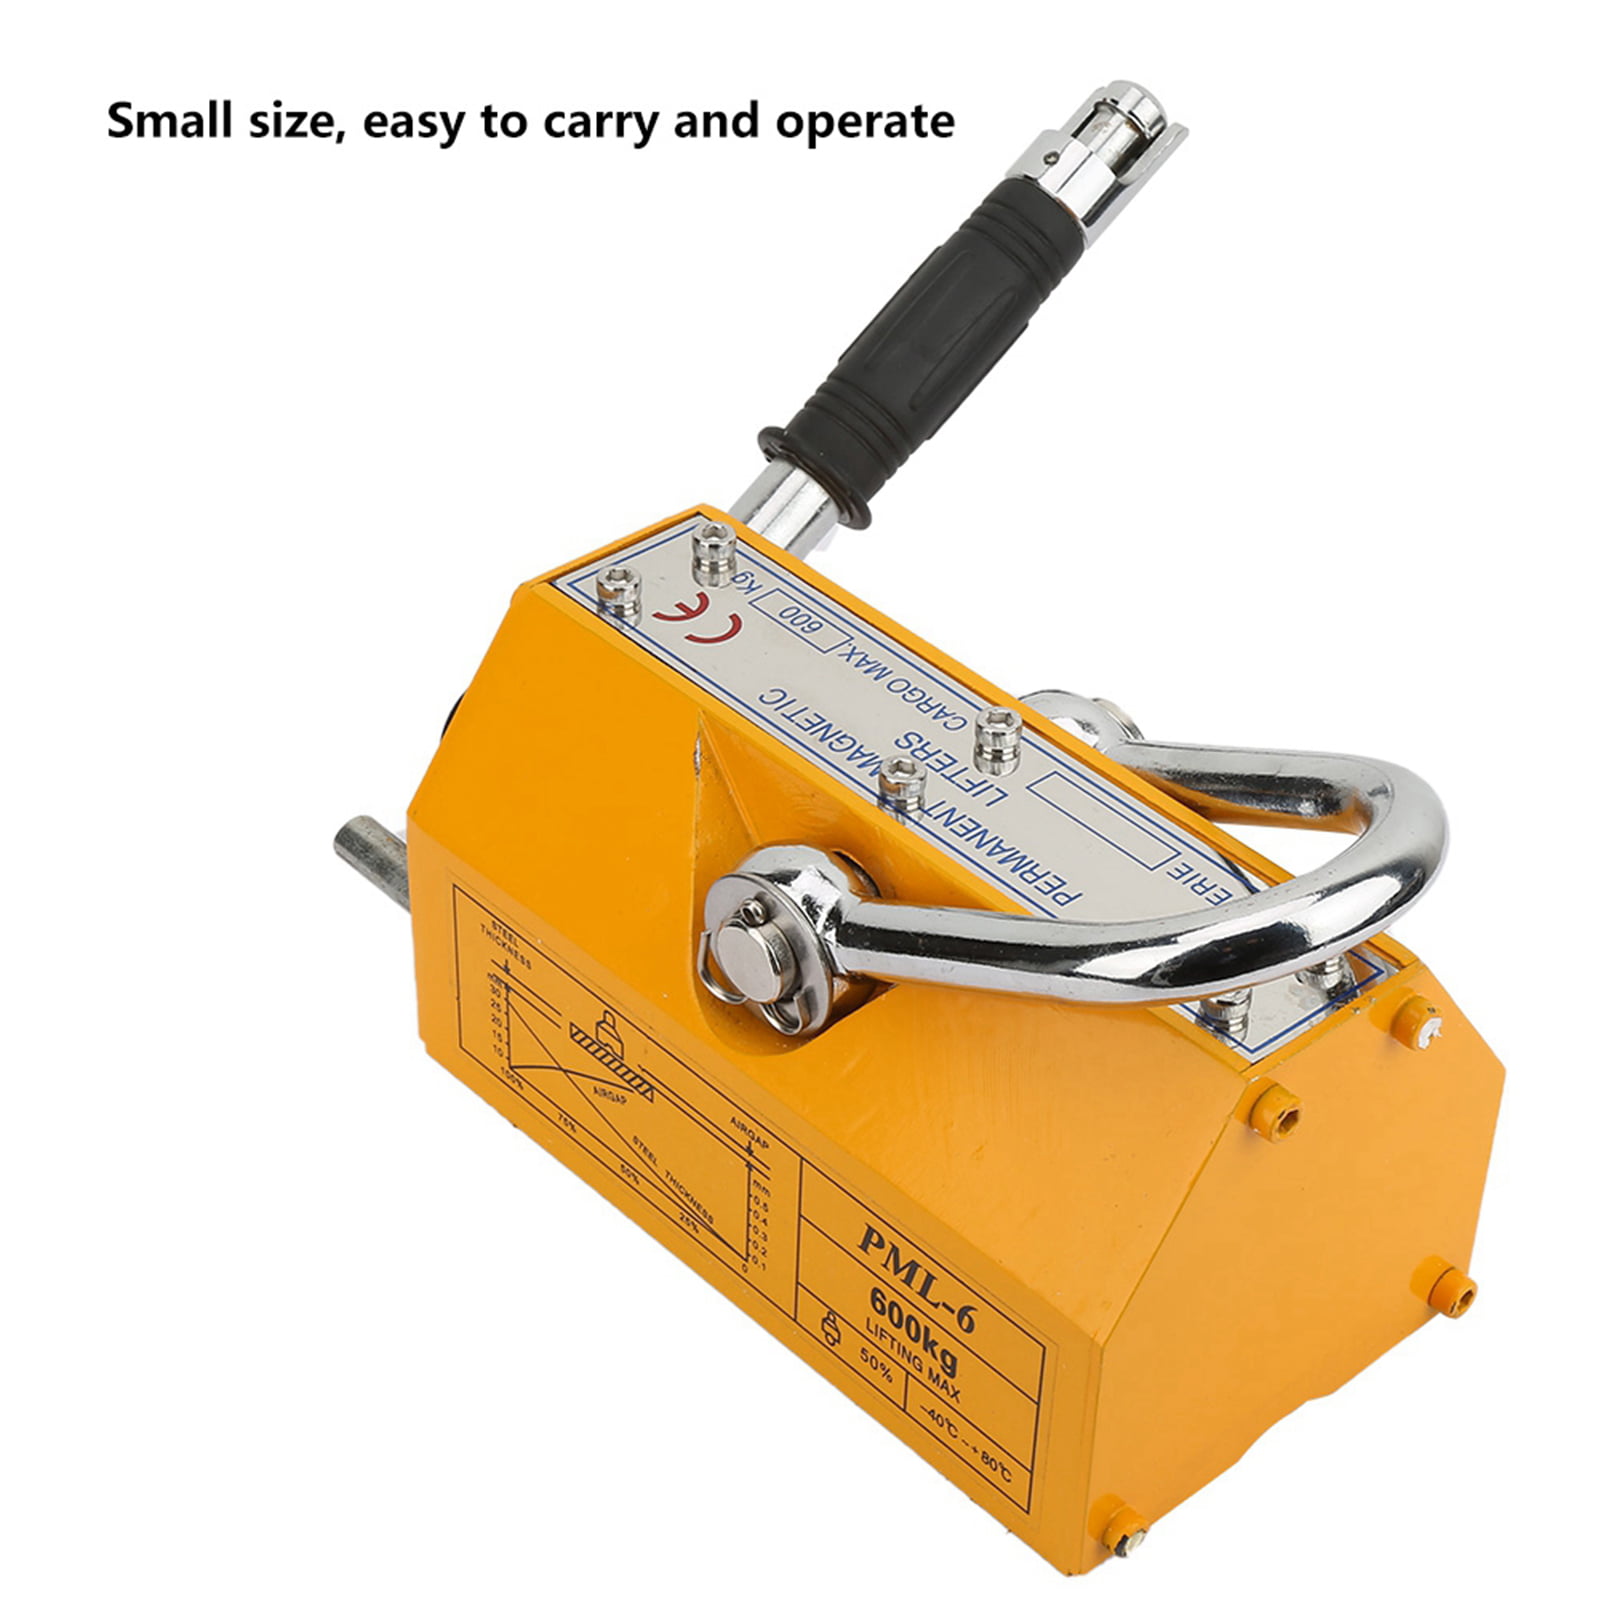 600KG Permanent Magnet Crane Portable Crane Magnetic Lifting Tool Durable Magnetic Lifter for Handling Steel Plates Transportation Industries Terminals Used In Factories 